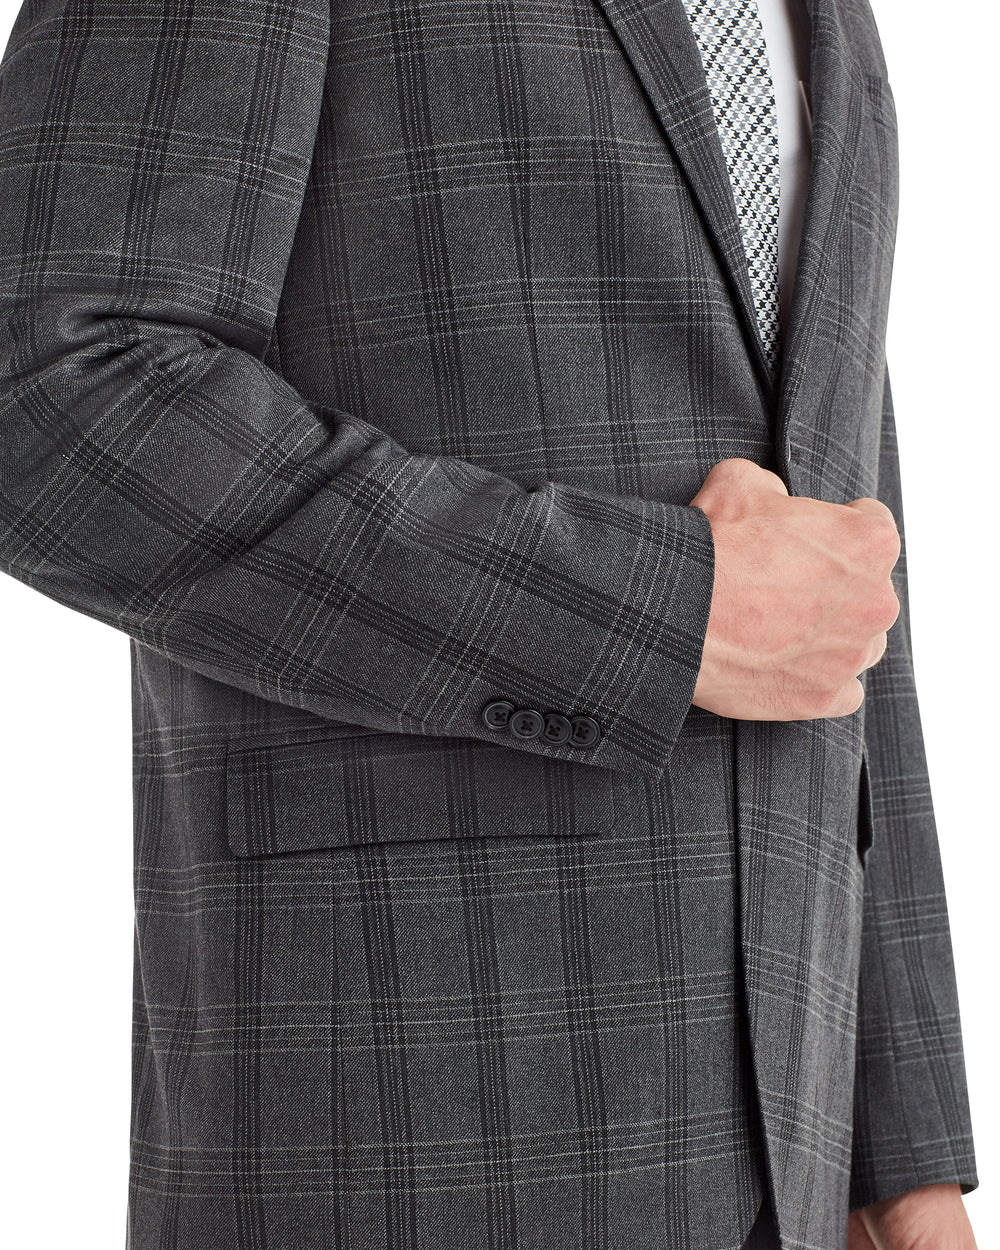 Crown Check Sportcoat Jacket - Charcoal